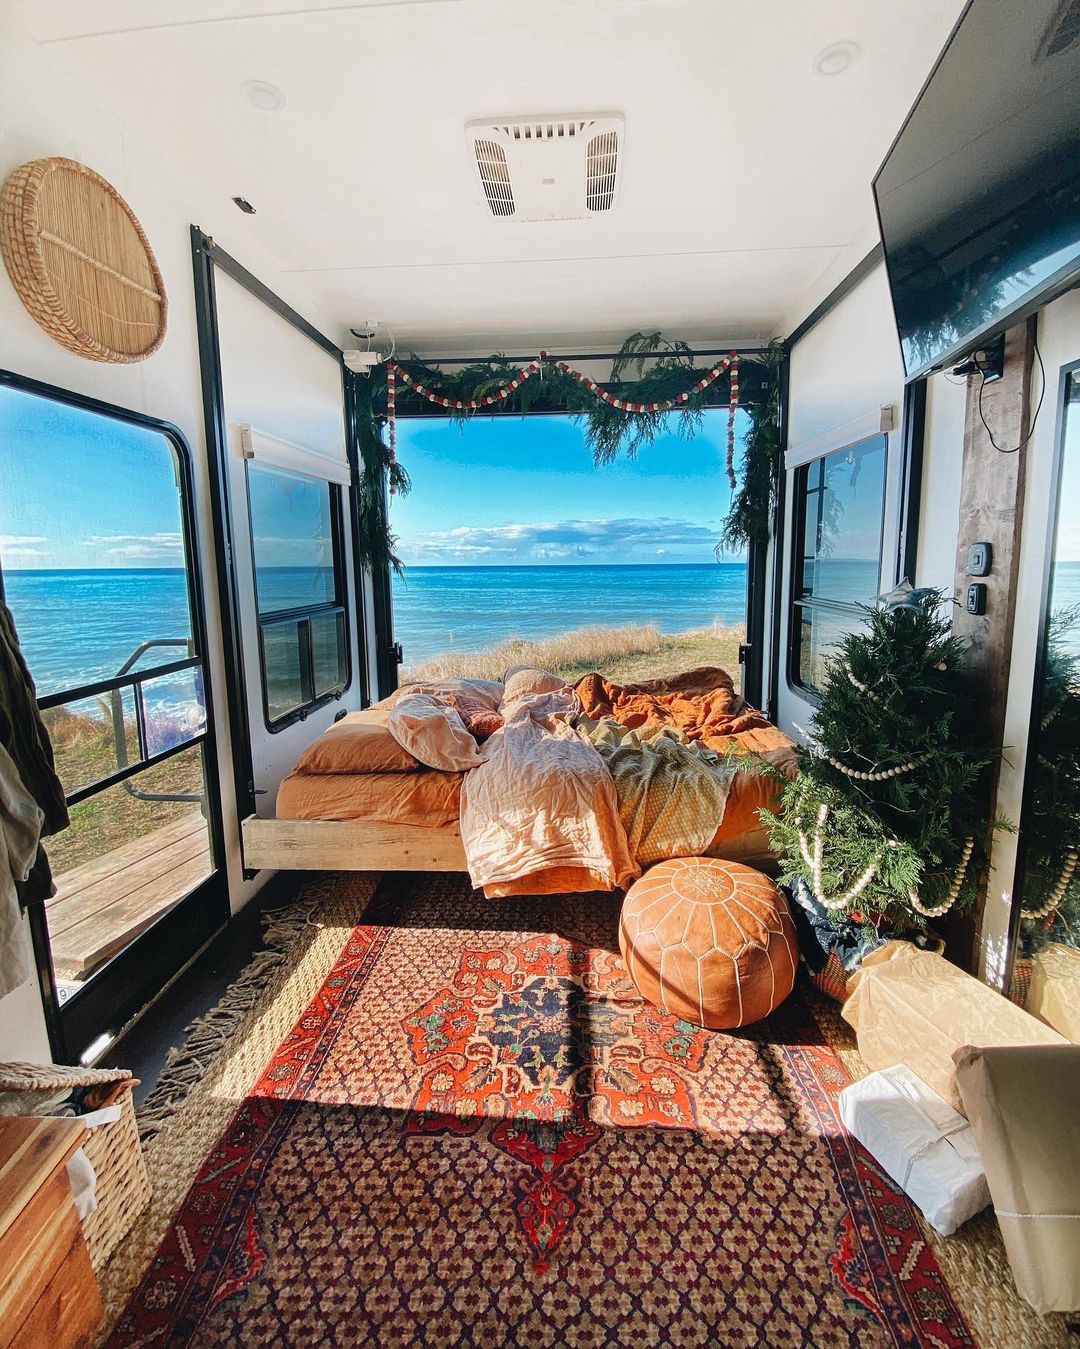 View of main bedroom of RV, with large glass windows and doors to reveal ocean views. Photo by Instagram user @theasphaltgypsy.